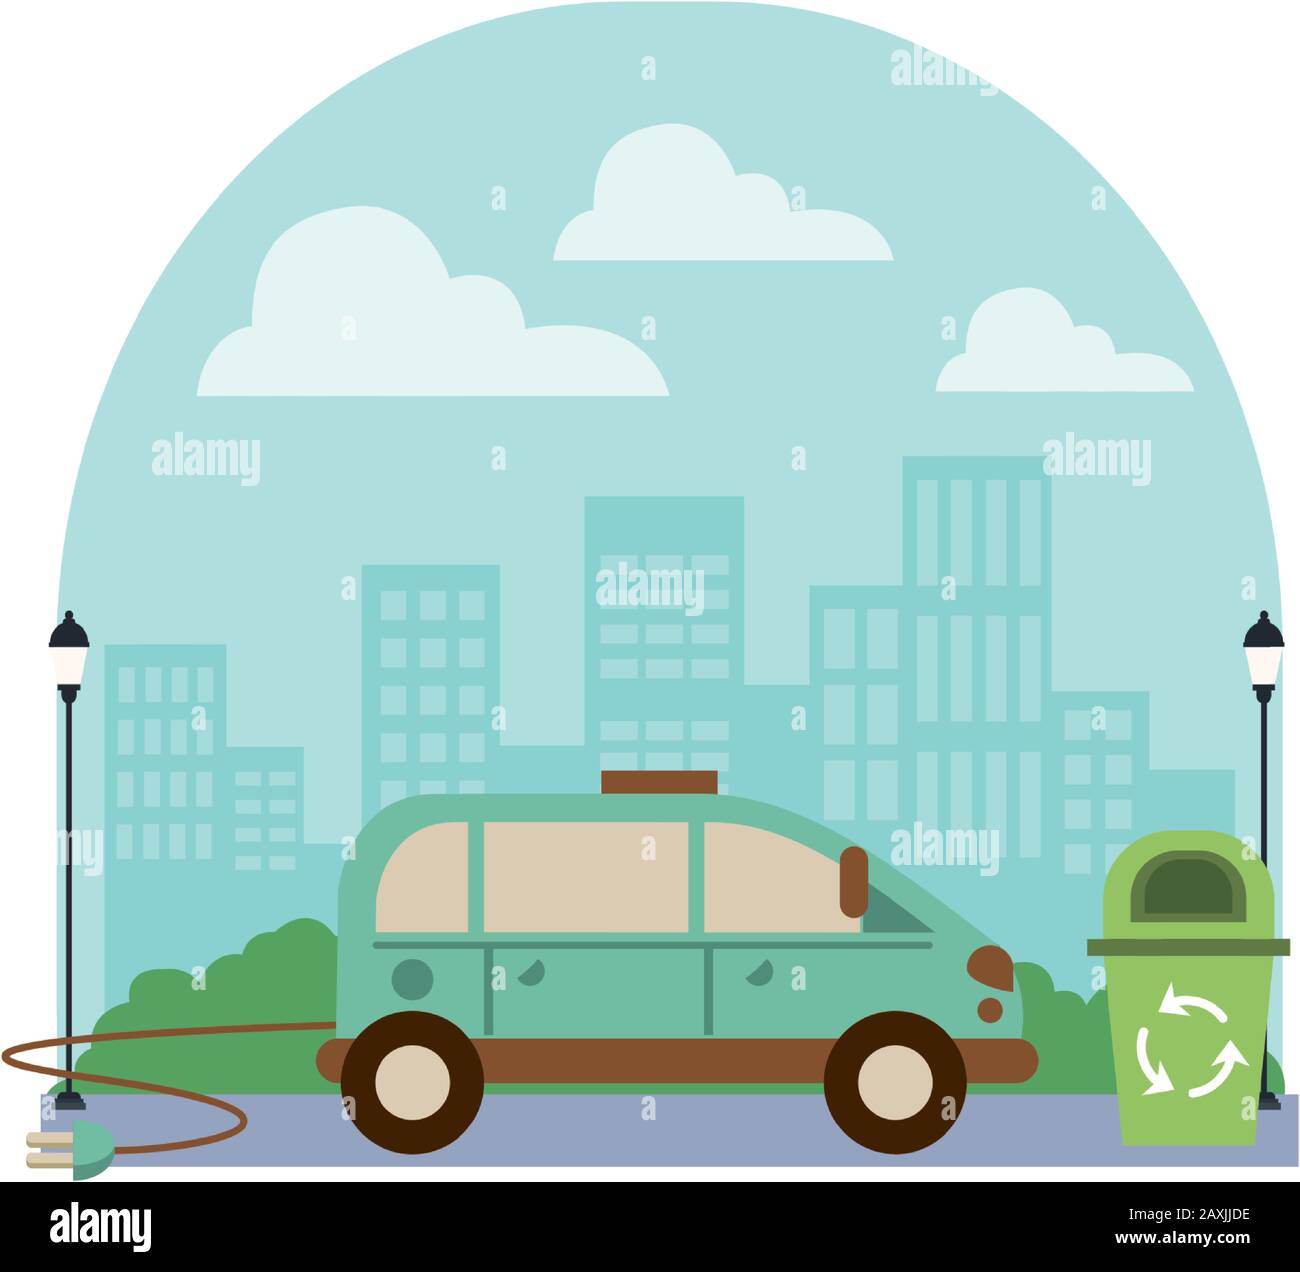 car vehicle auto with waste bin Stock Vector